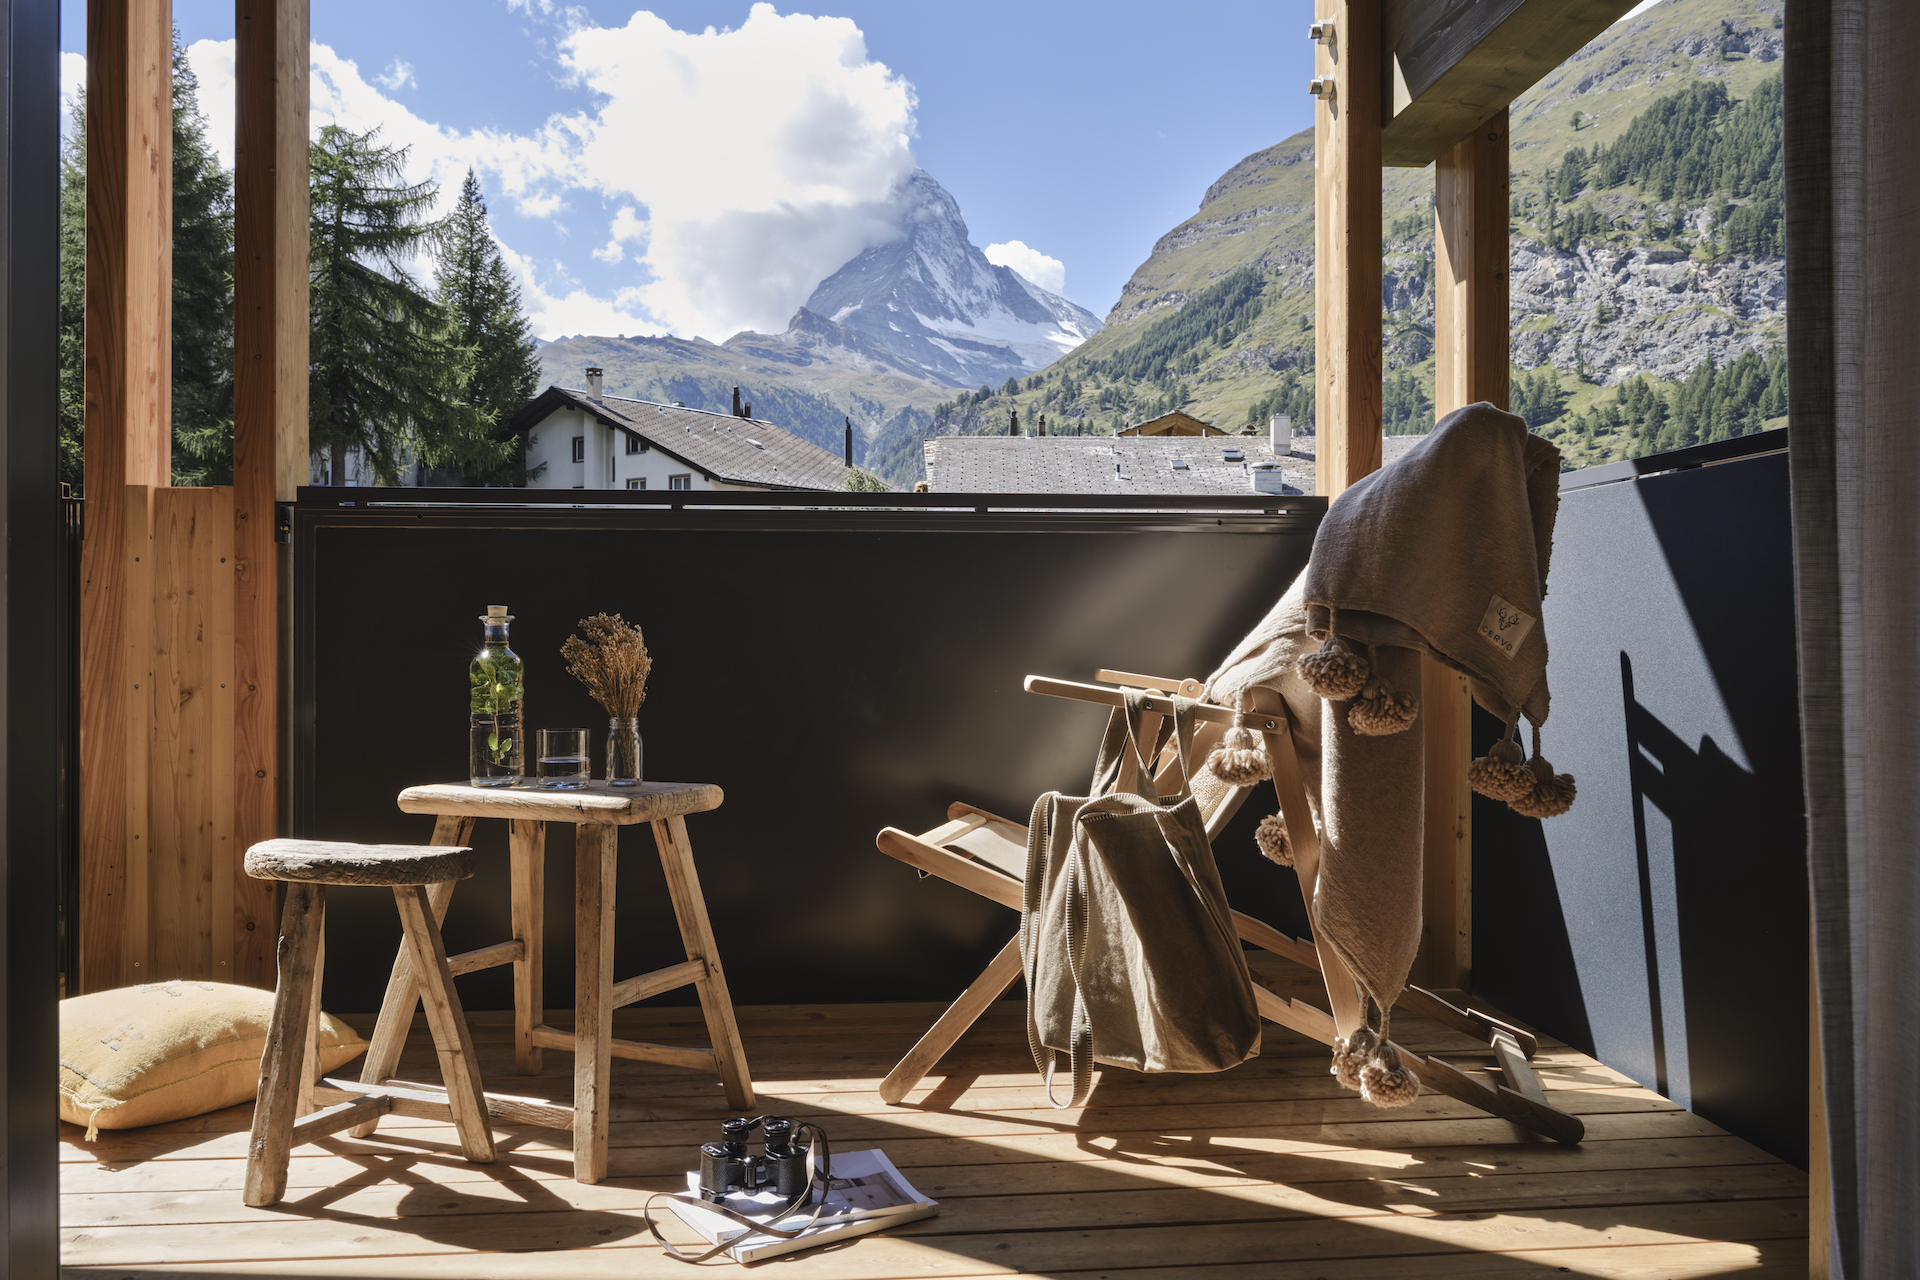 Balcony of the Nomad Room with view of the Matterhorn